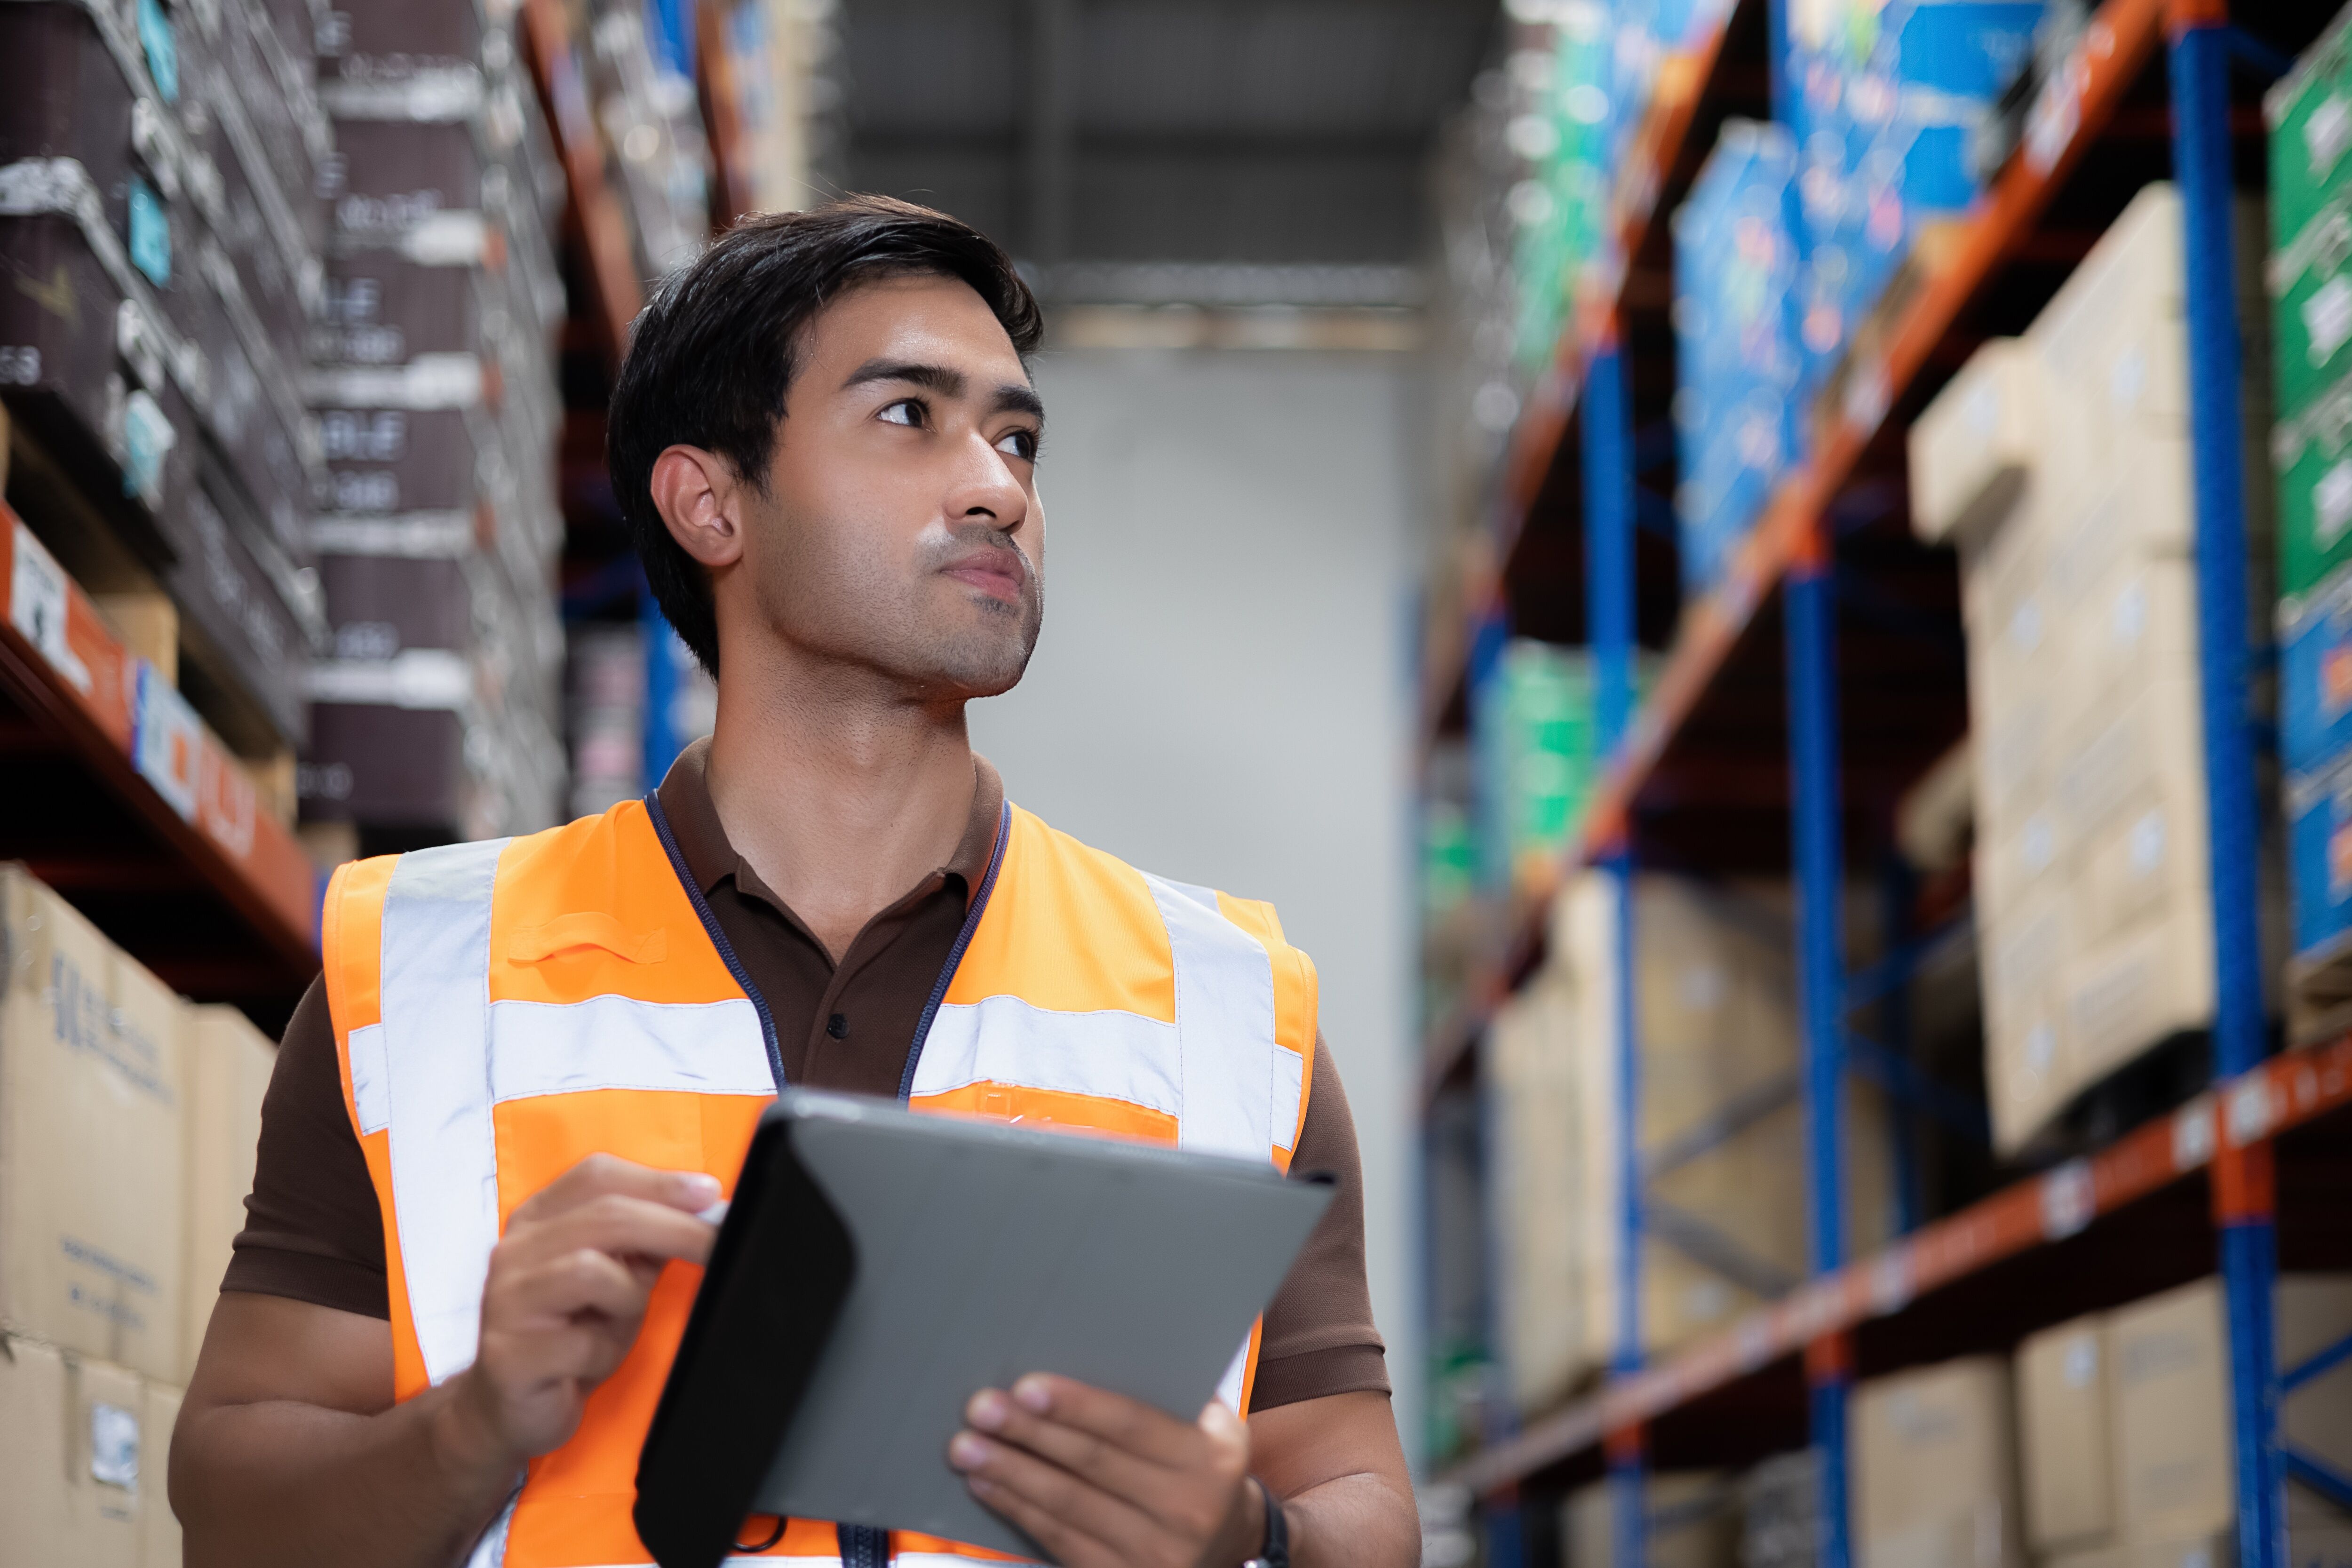 A focused male inventory manager in a high-visibility vest uses a tablet to check stock in a warehouse.